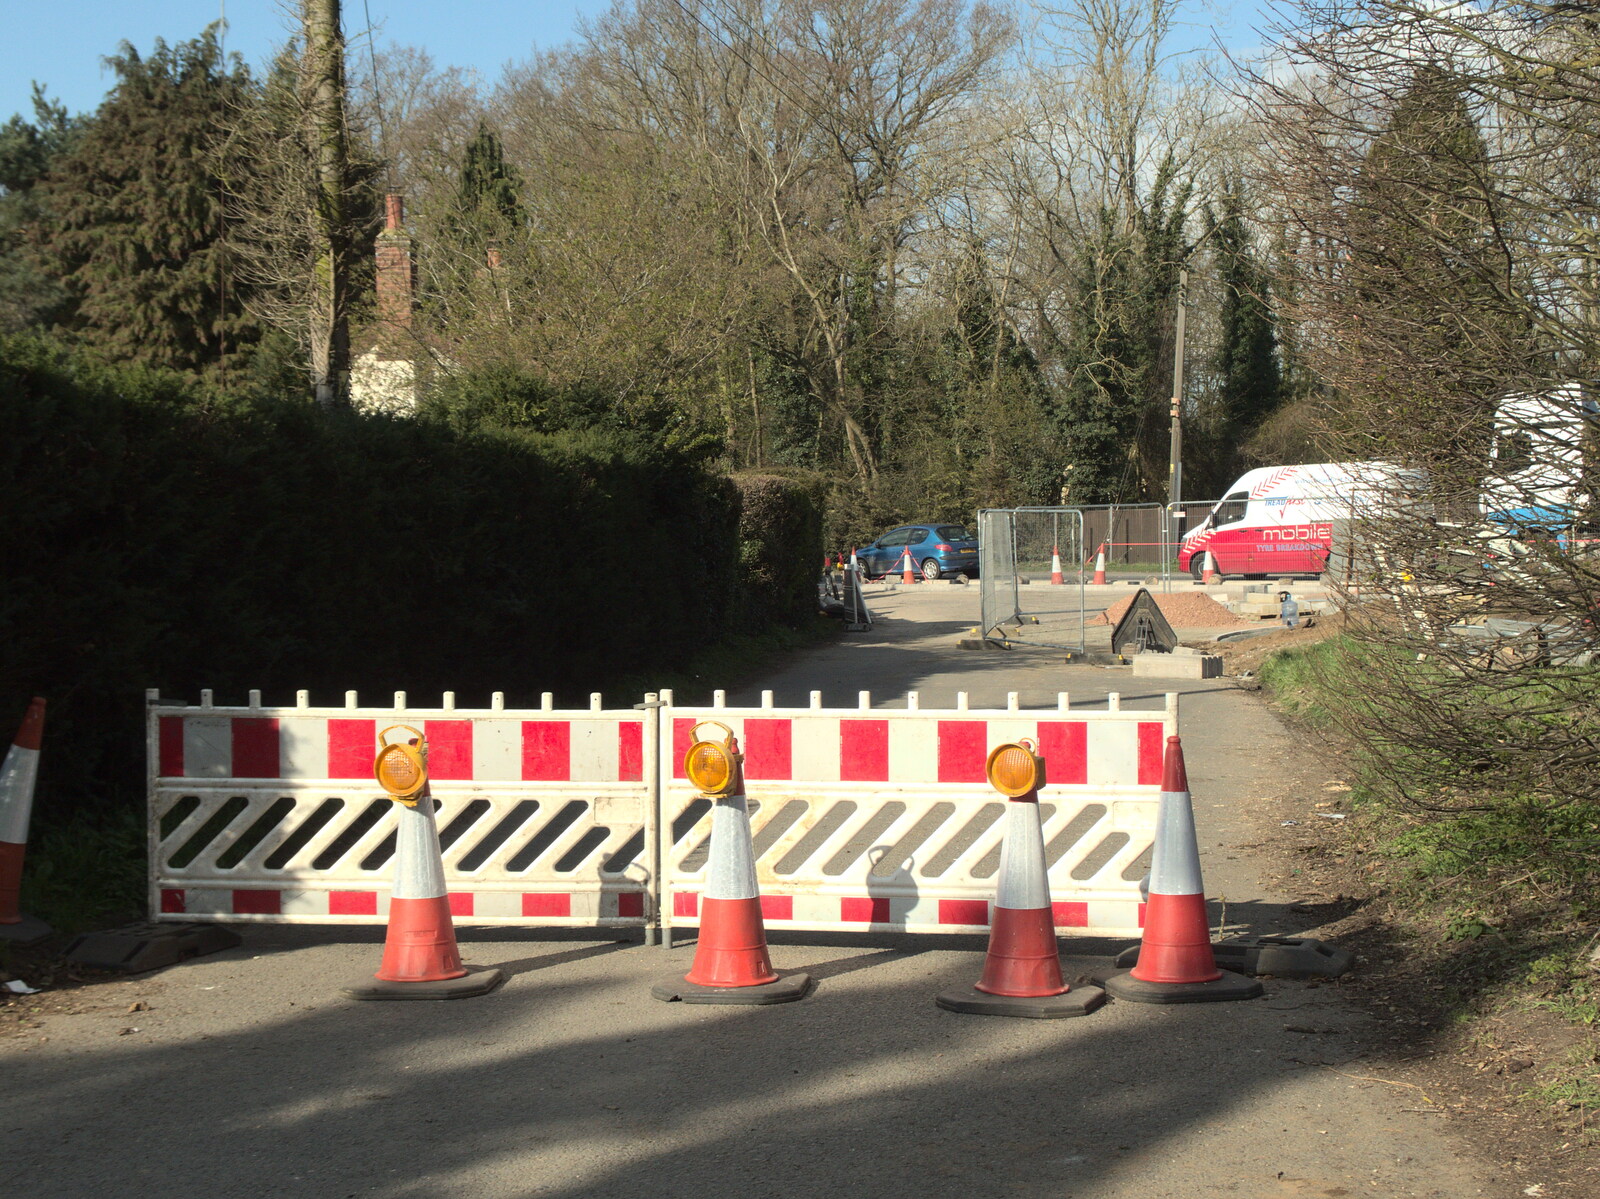 The Brome Triangle section is closed permanently from Roadworks and Harry's Trampoline, Brome, Suffolk - 6th April 2021